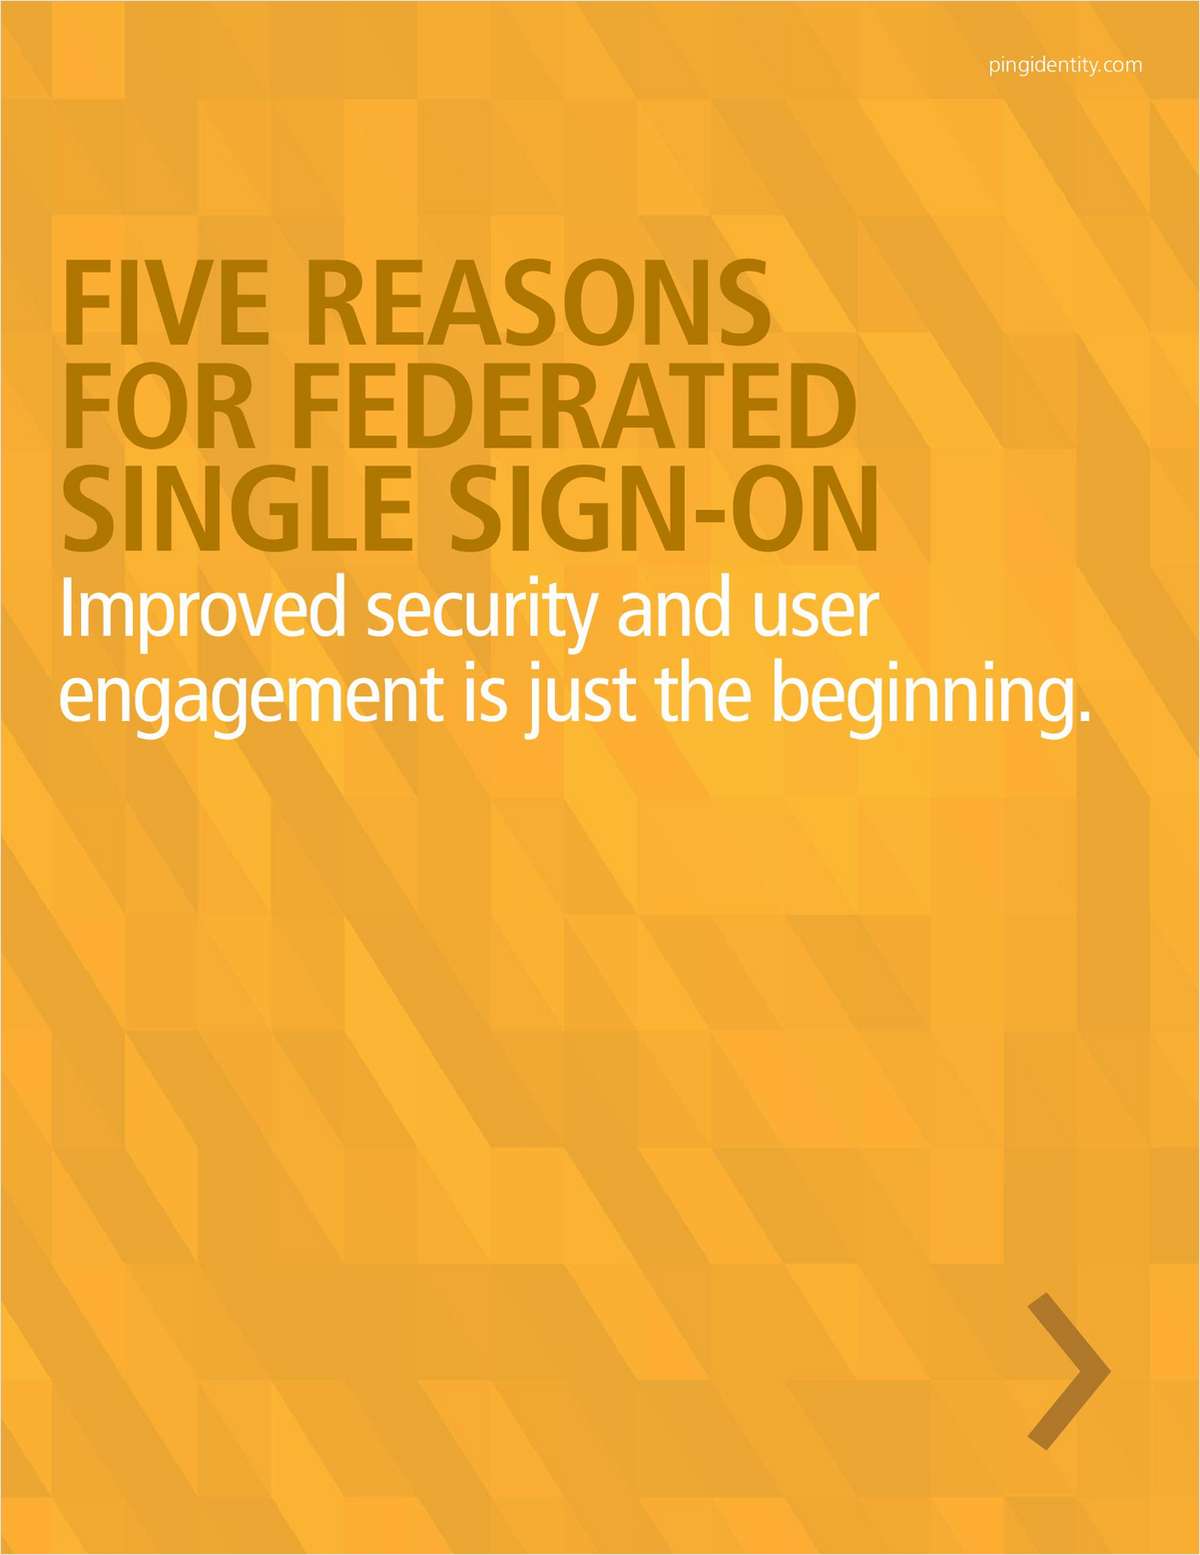 5 Reasons for Federated Single Sign-On